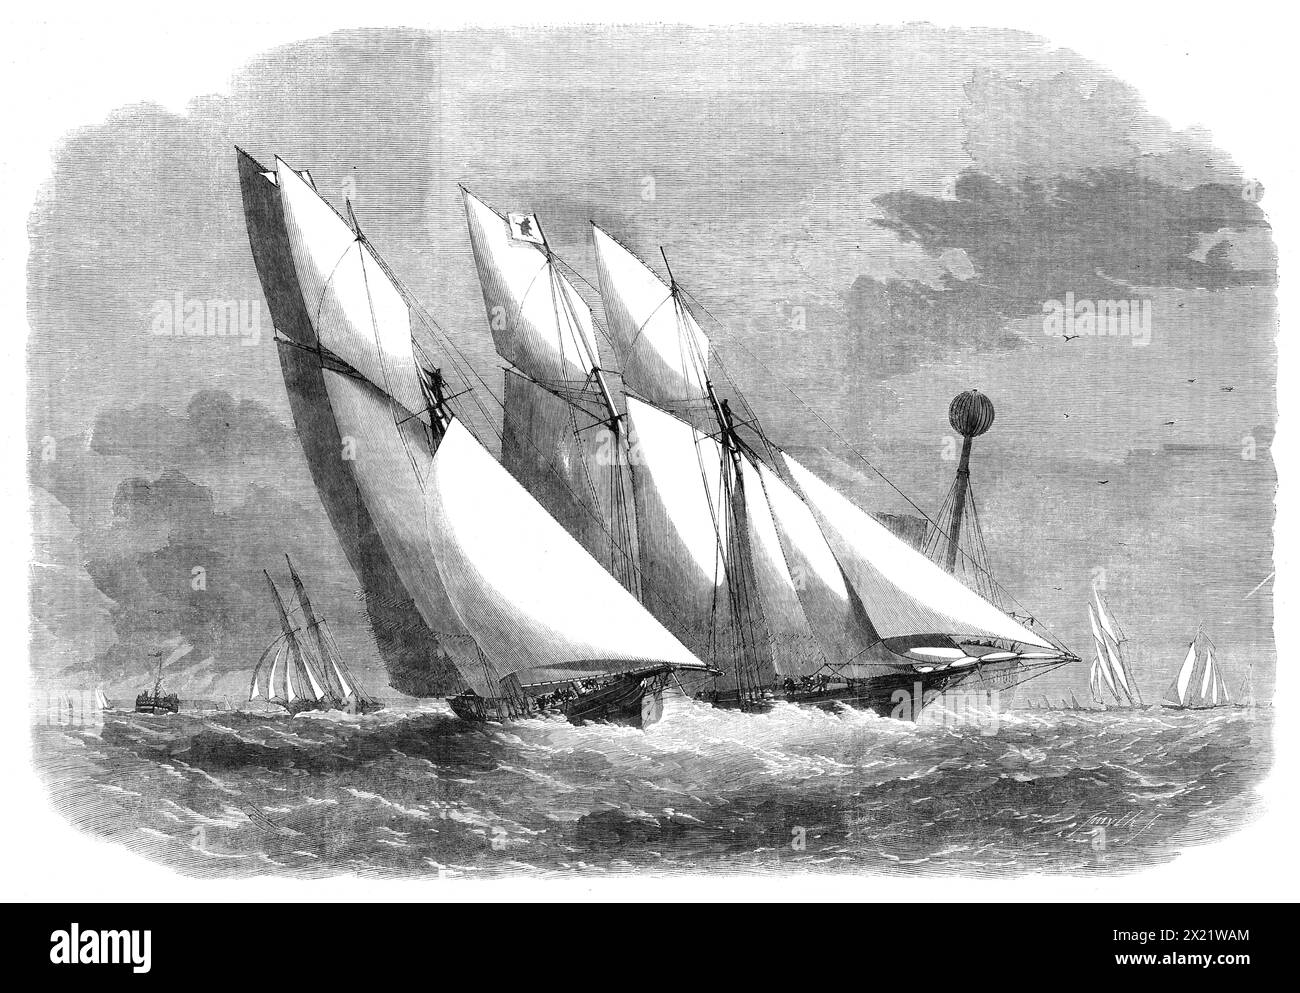 Annual schooner race of the Royal Thames Yacht Club: the yachts at the Mouse light ship, 1862. 'The morning had been very gloomy and threatening, but just before the vessels started it became much brighter and more promising...Flying Cloud at once hoisted her mainsail, and Leonora was not long delaying, but Shark and Galatea waited until they had partially swung before touching their halyards. Flying Cloud made an excellent start, and took the lead, followed by Leonora, and in less than ten minutes the sails, including big topsails, were set and trimmed...A wonderfully close match after a run Stock Photo